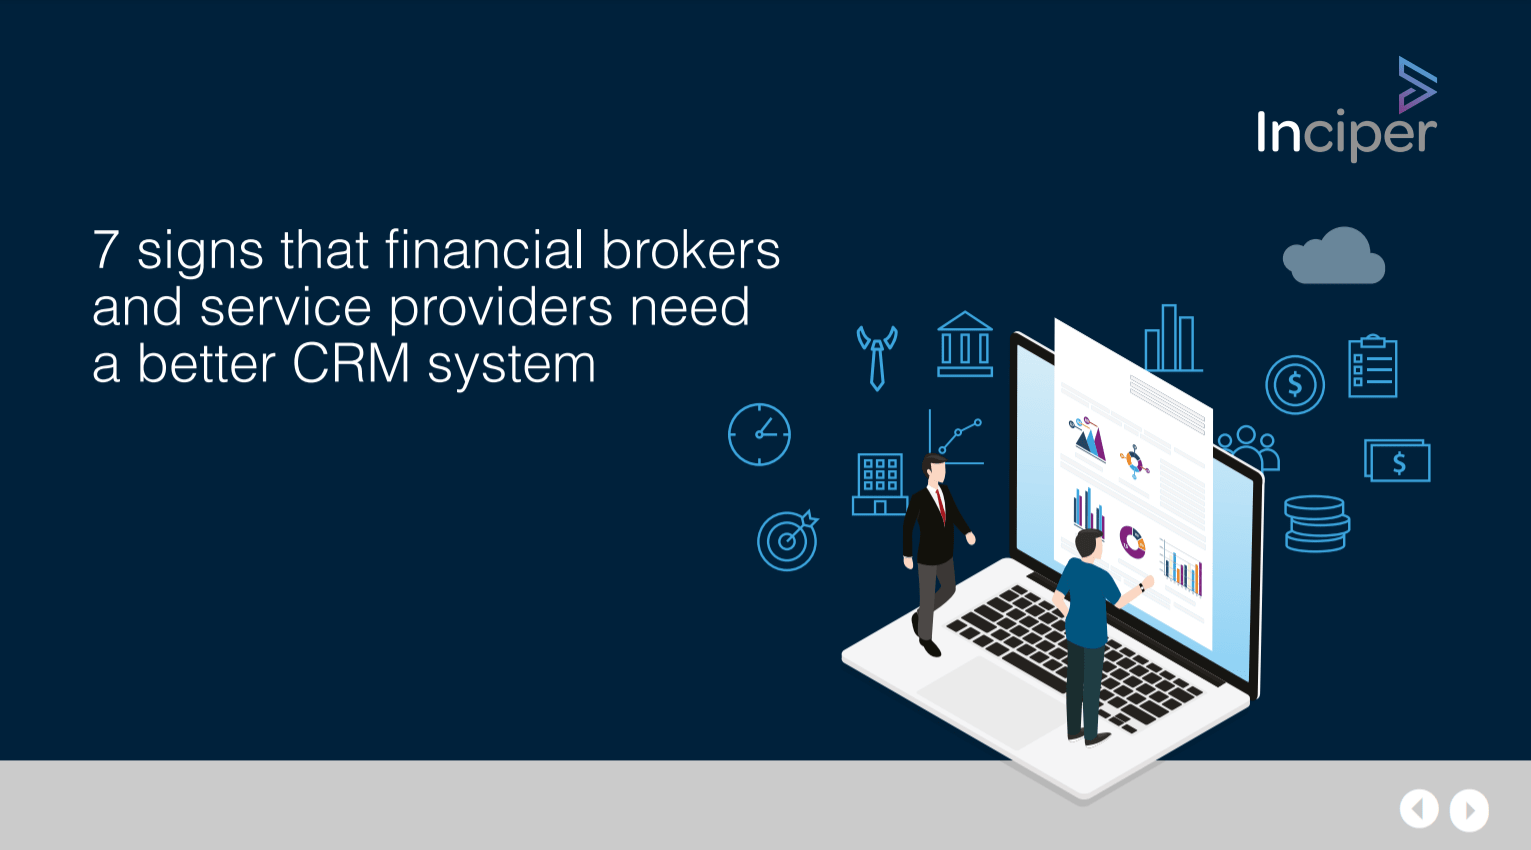 7 signs that financial brokers and service providers need a better CRM system